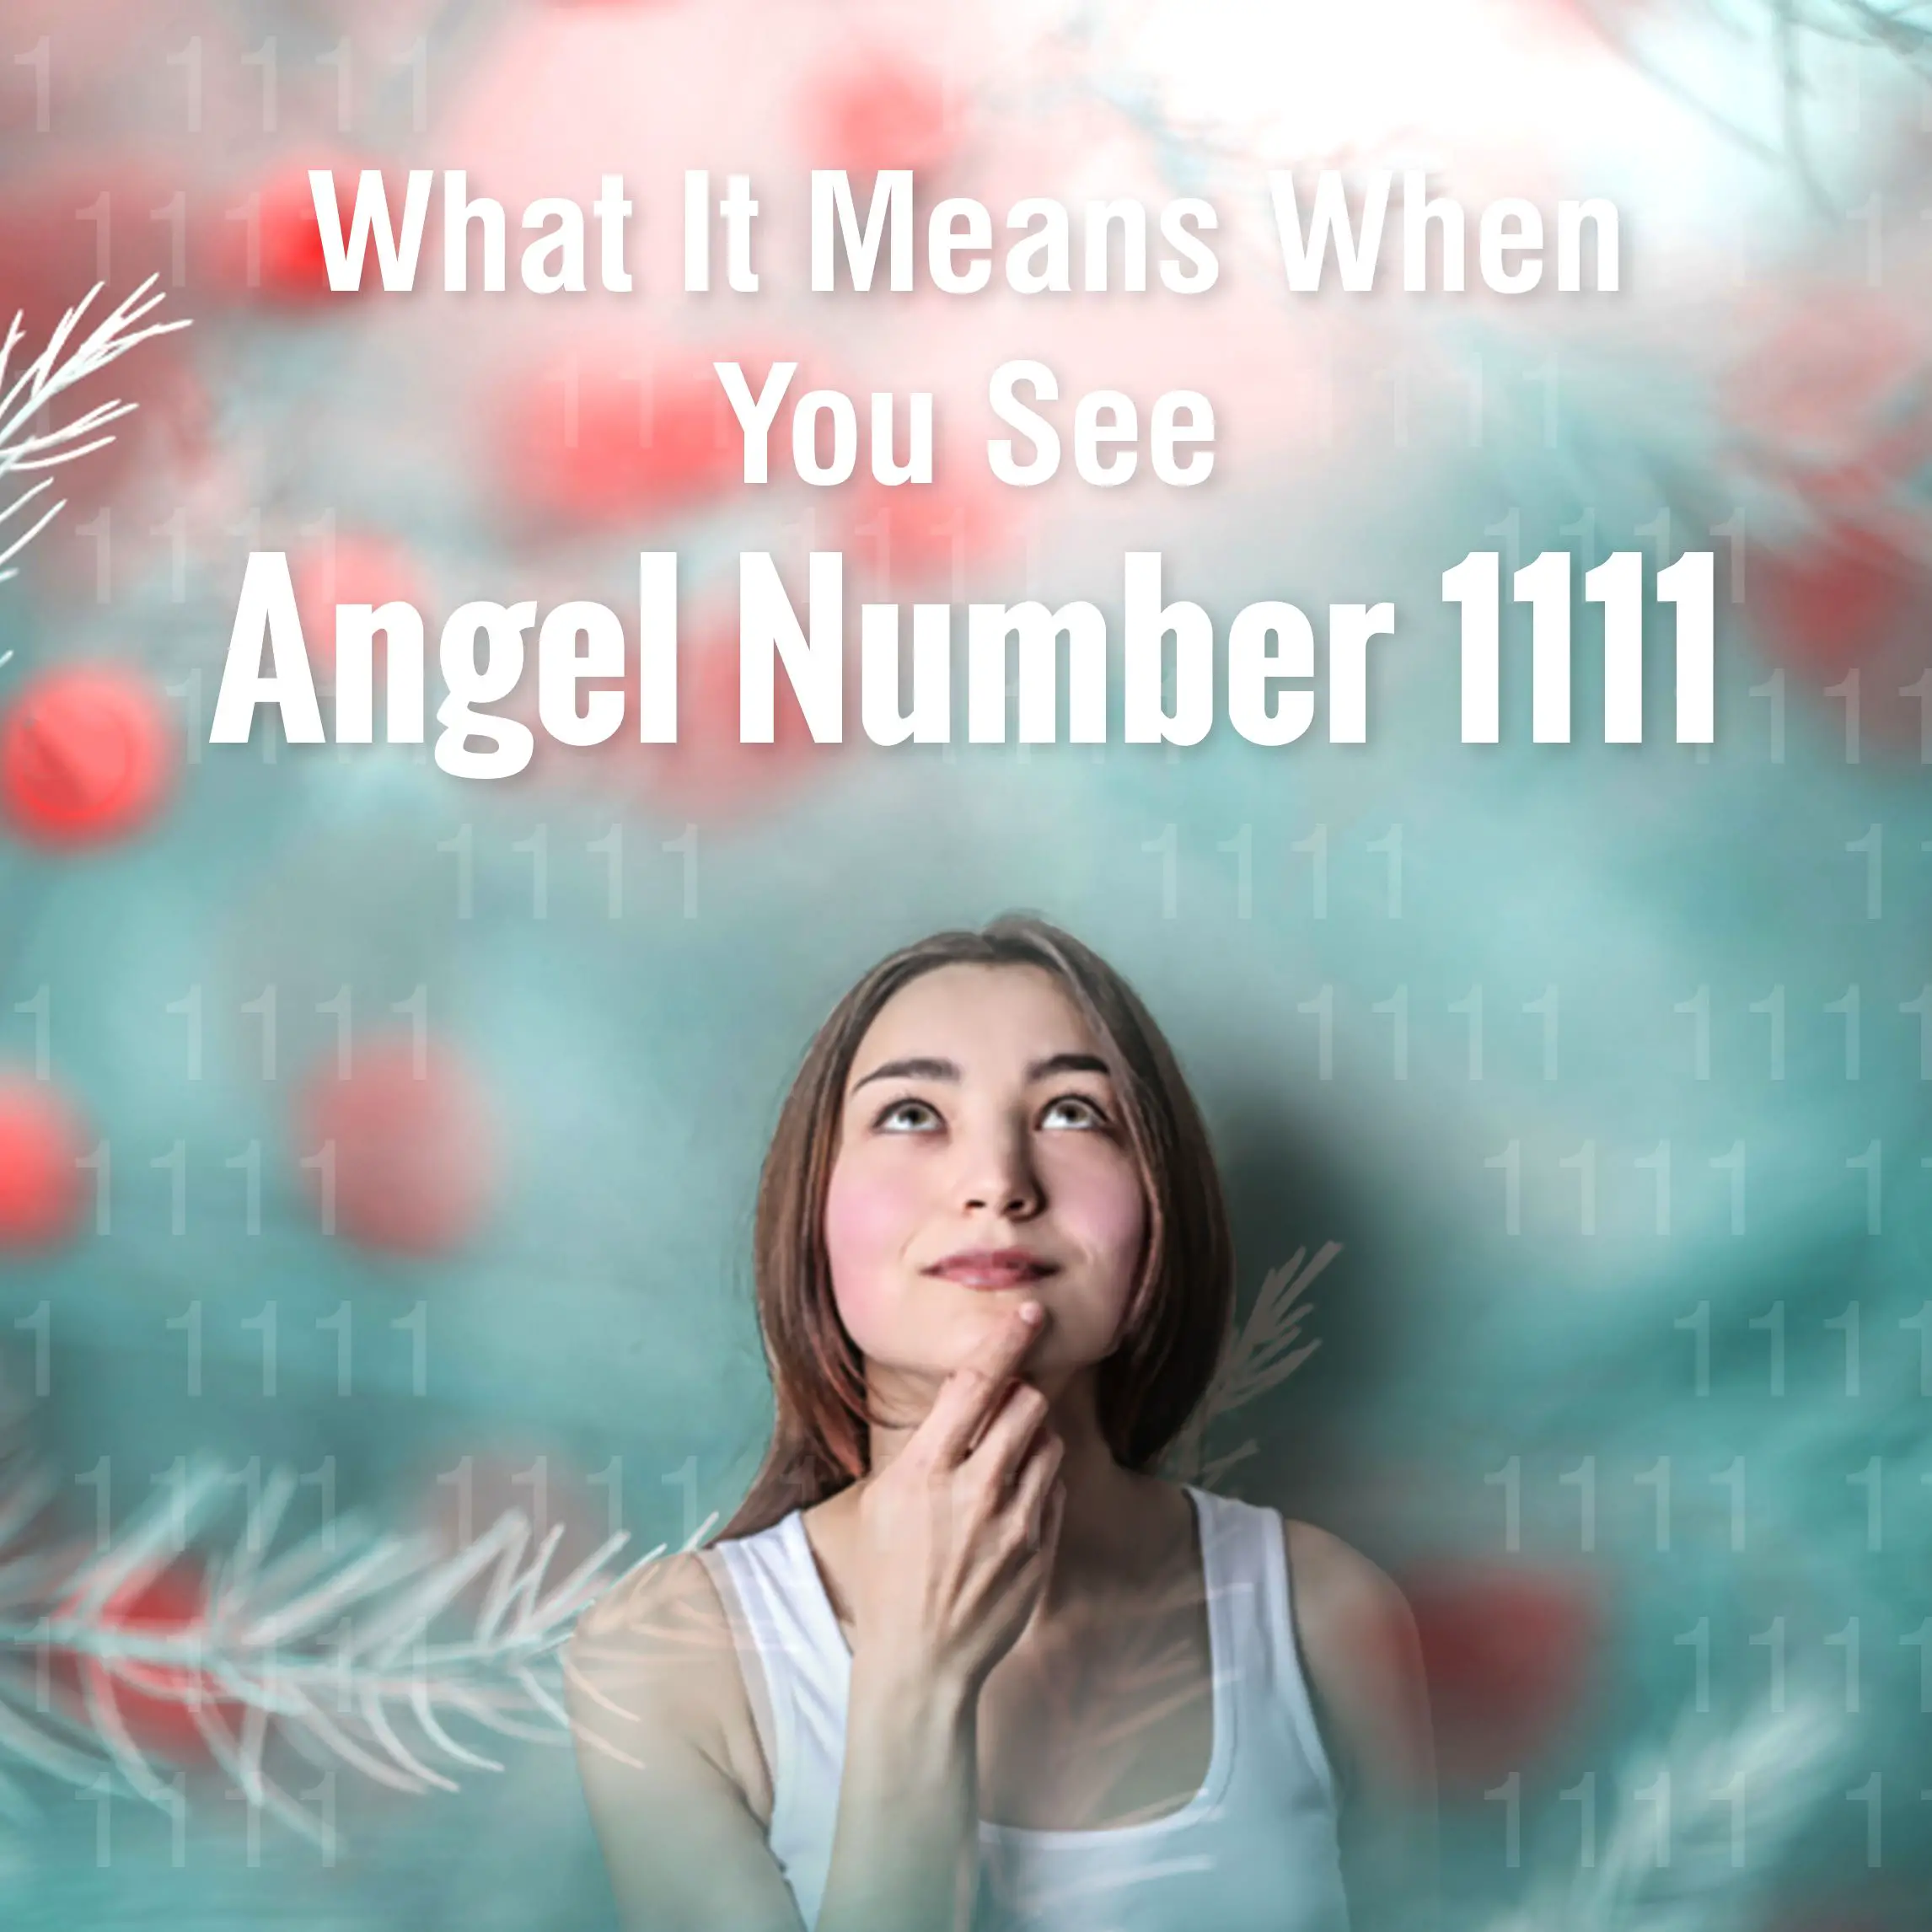 Why Do You Keep Seeing The Angel Number 1111?